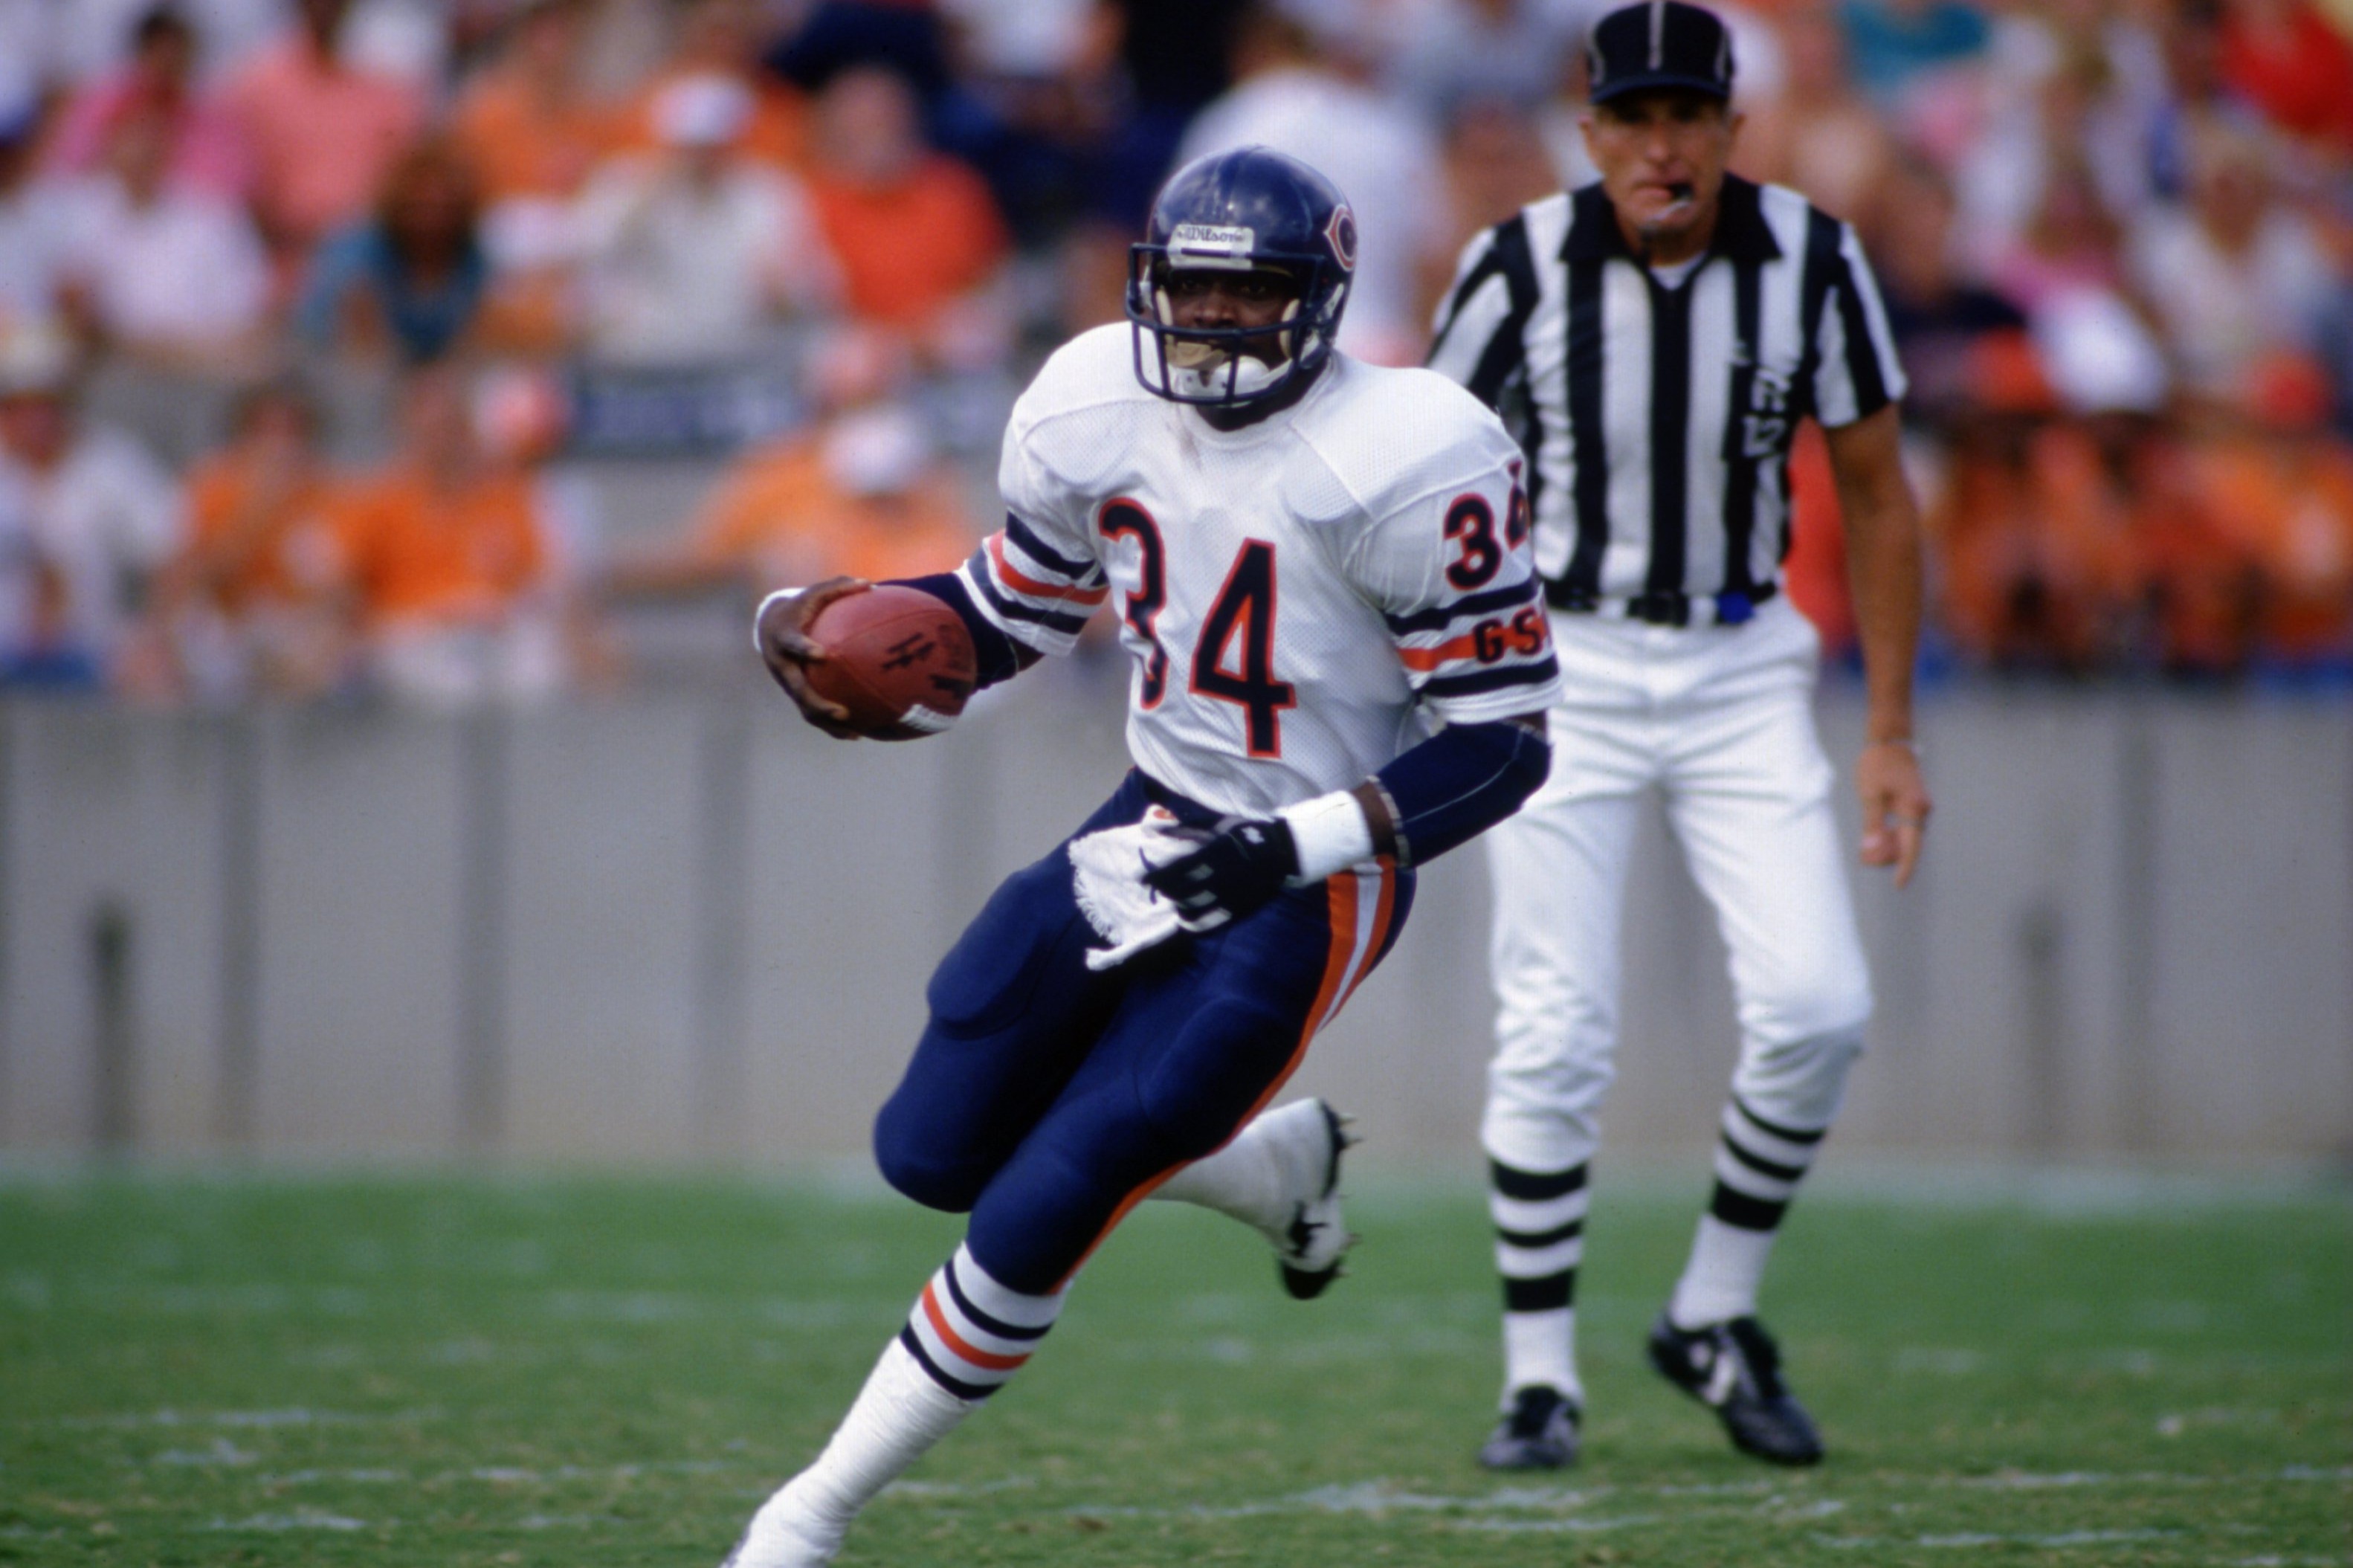 NFL 100: At No. 8, Walter Payton's recipe of toughness, versatility and  dedication created Sweetness - The Athletic